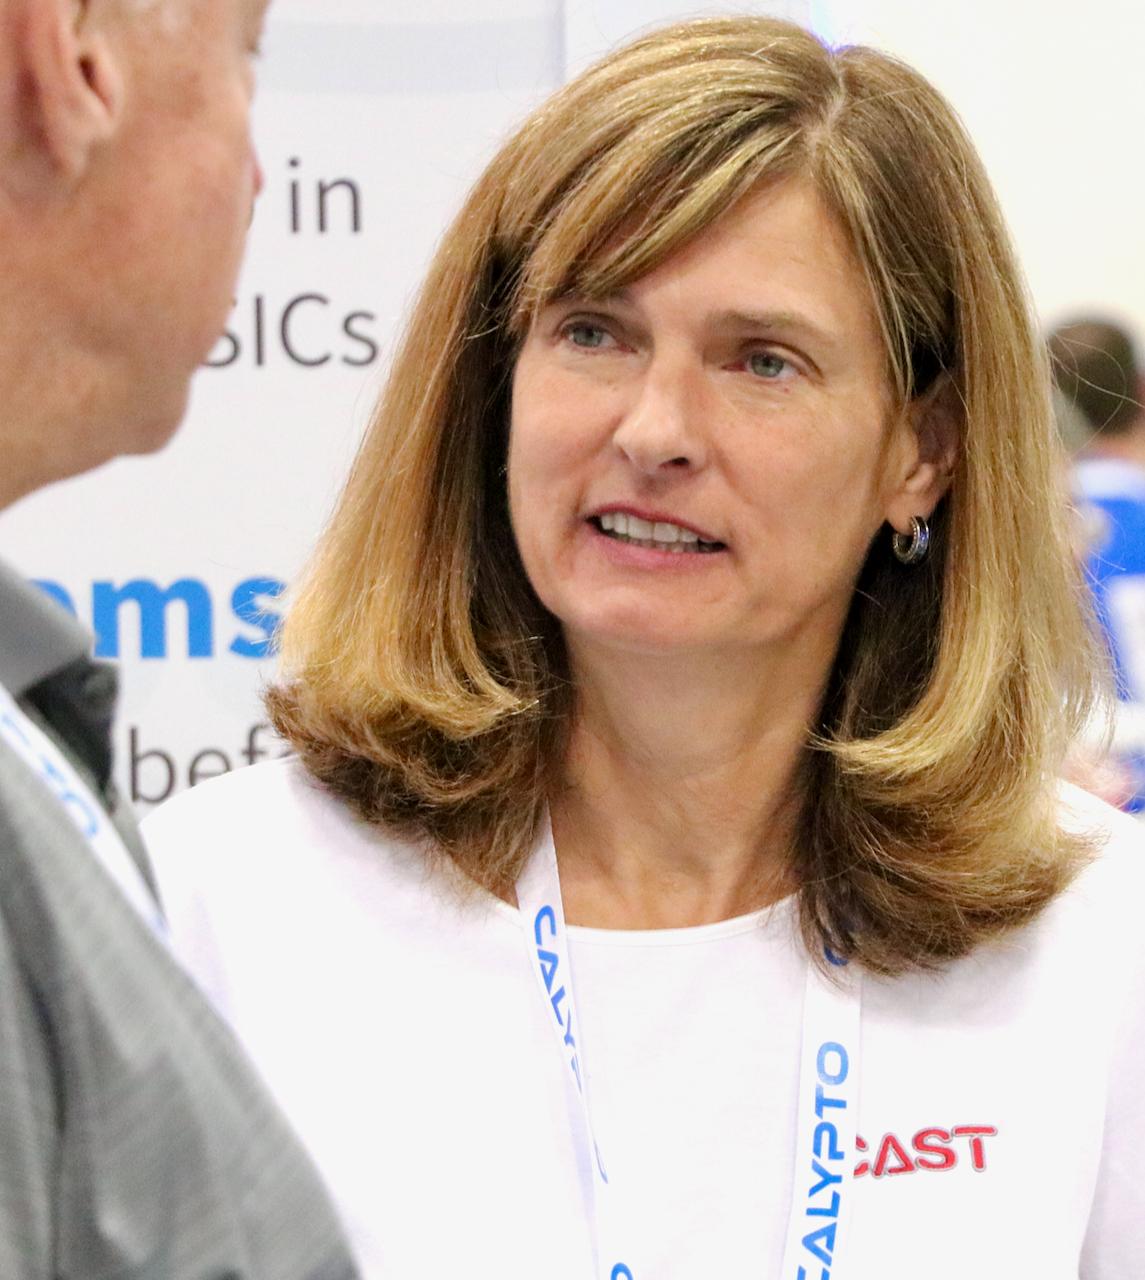 CAST VP of Sales Meredith Lucky discusses IP cores at the DAC trade show